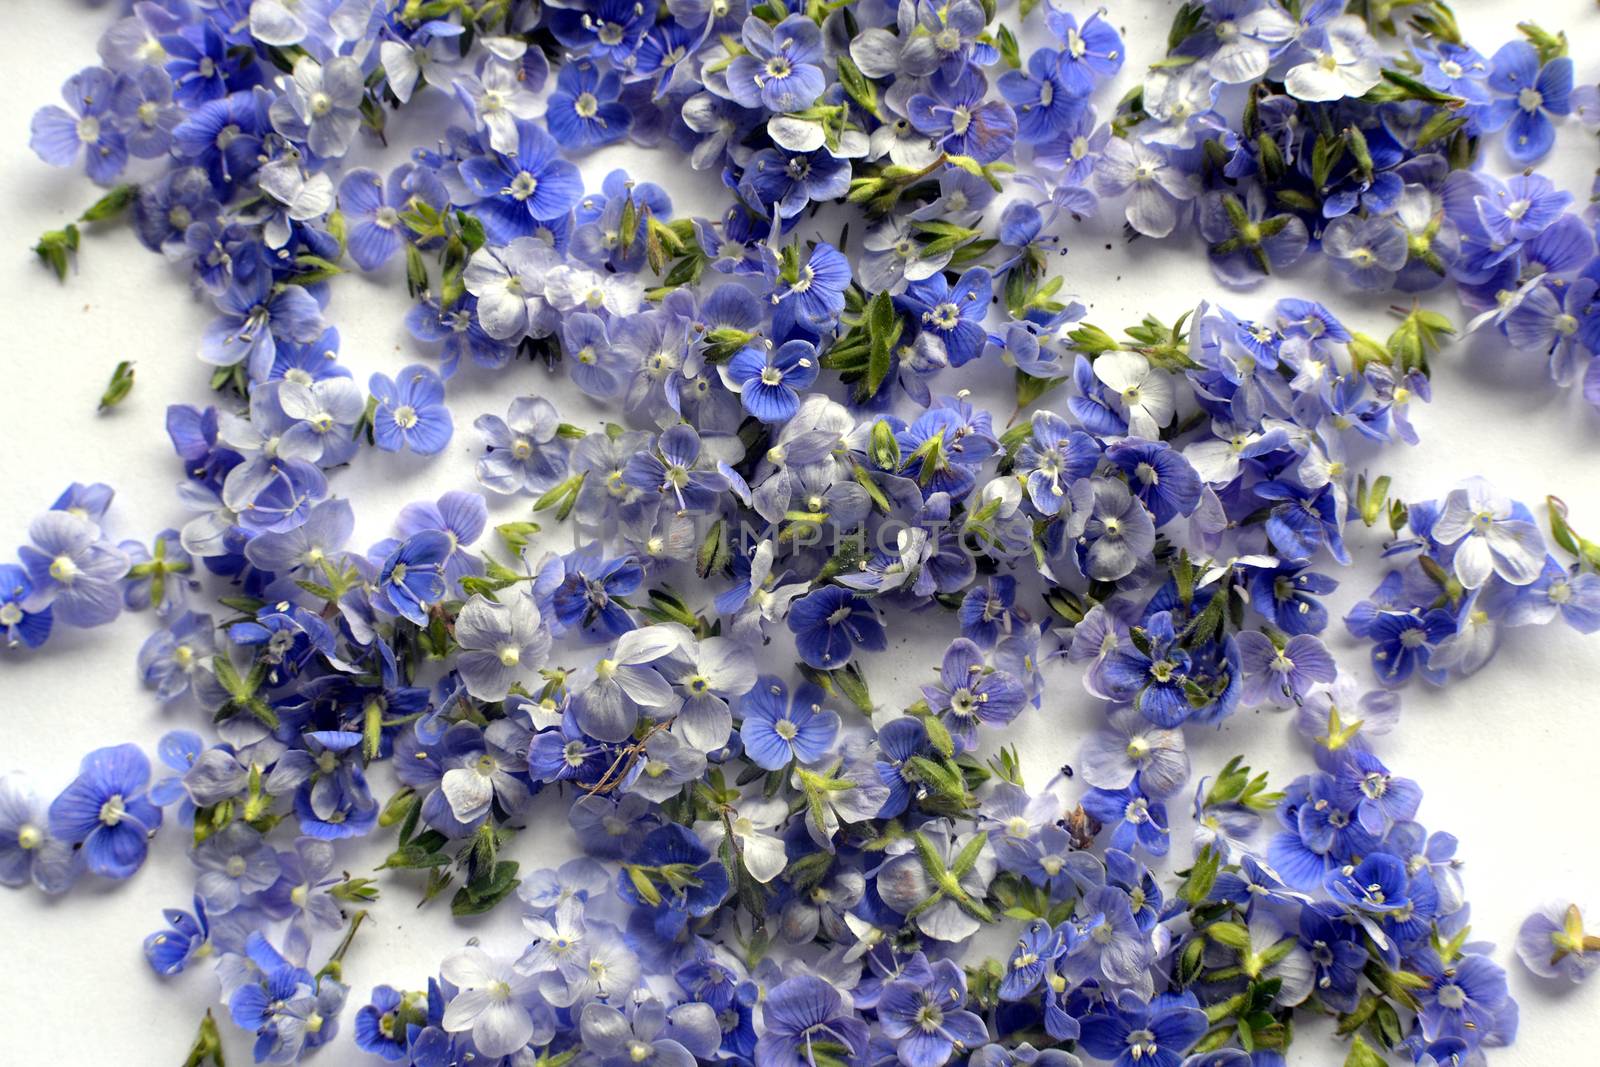 Pile of Blue Germander speedwell also known as Veronica chamaedrys or bird's eye speedwell or cat's eye over white background